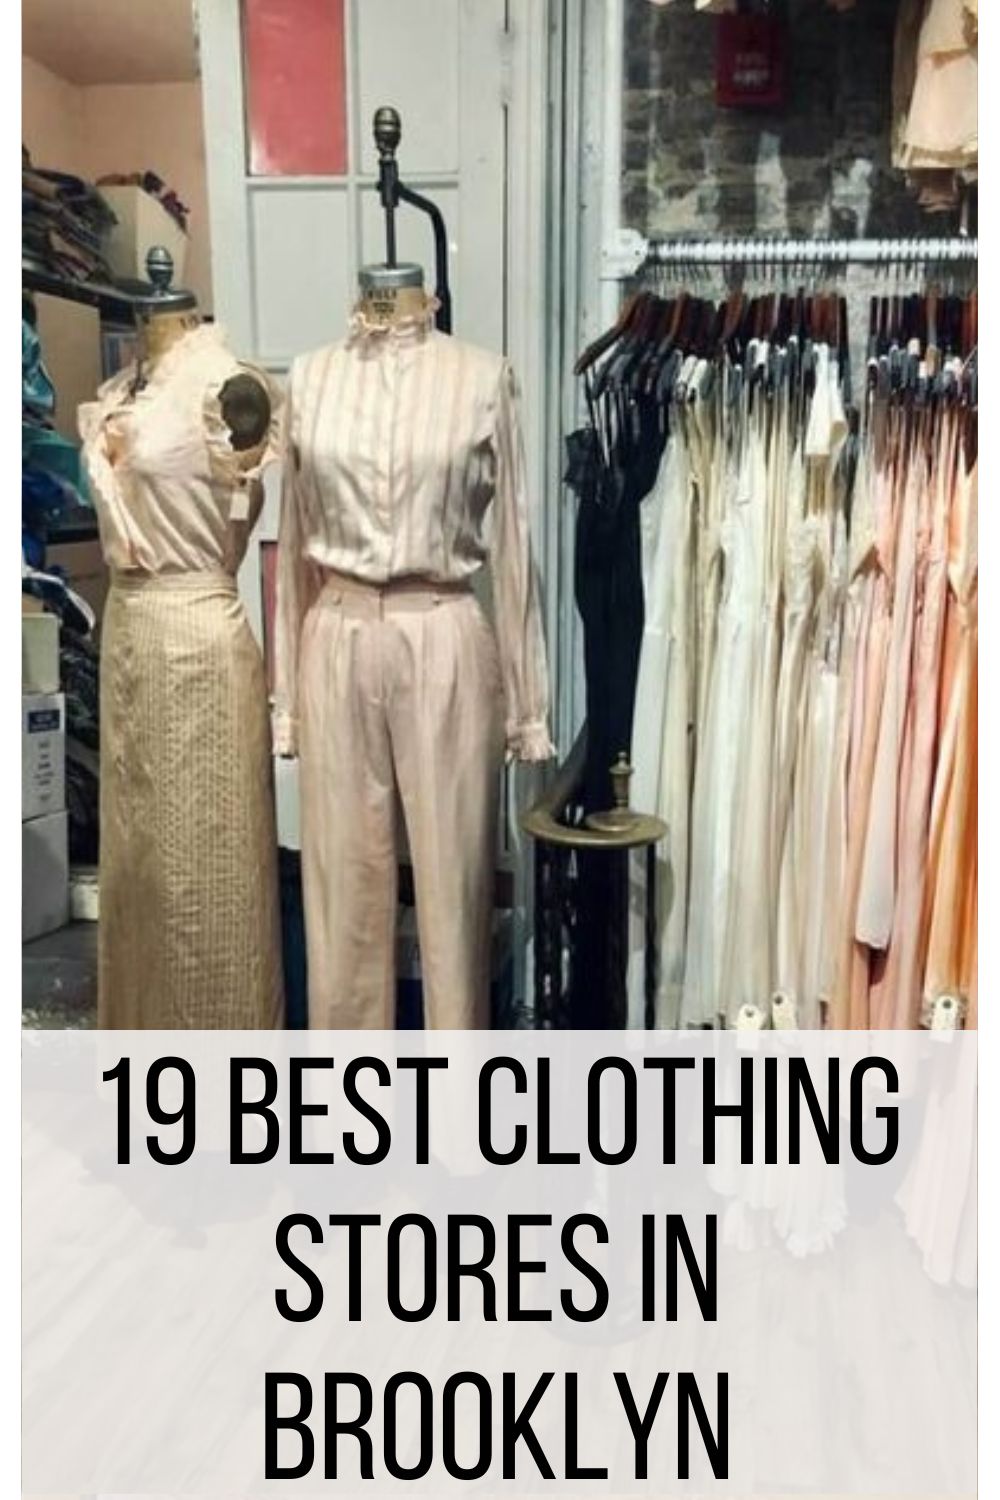 19 Best Clothing Stores in Brooklyn